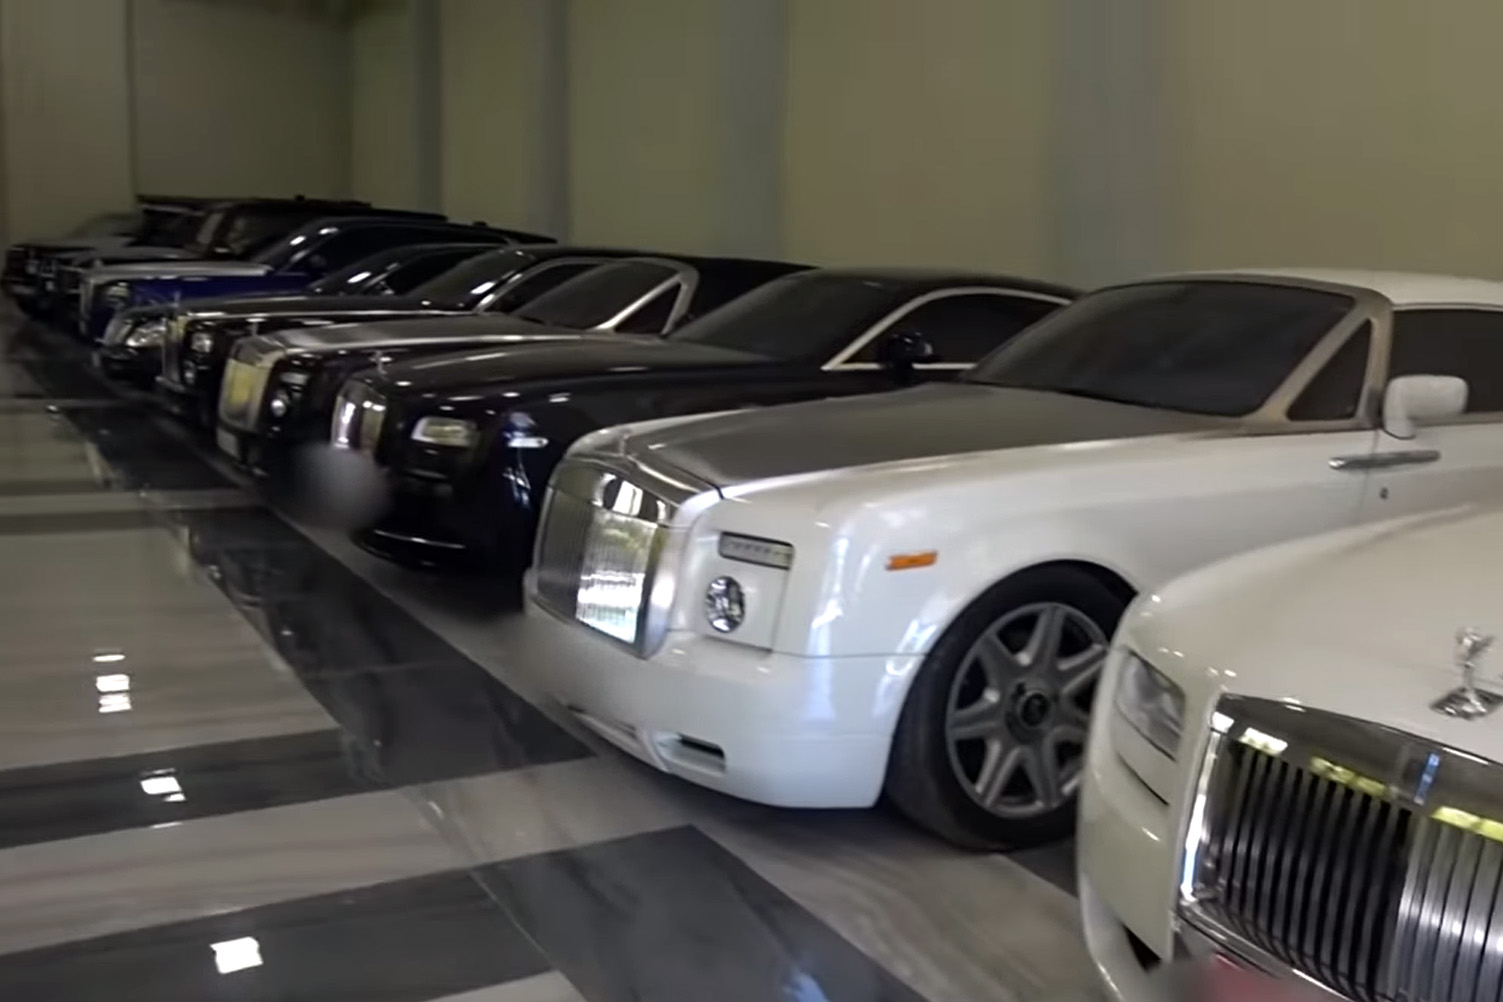 Tsarukyan’s garage included a large collection of luxury vehicles.